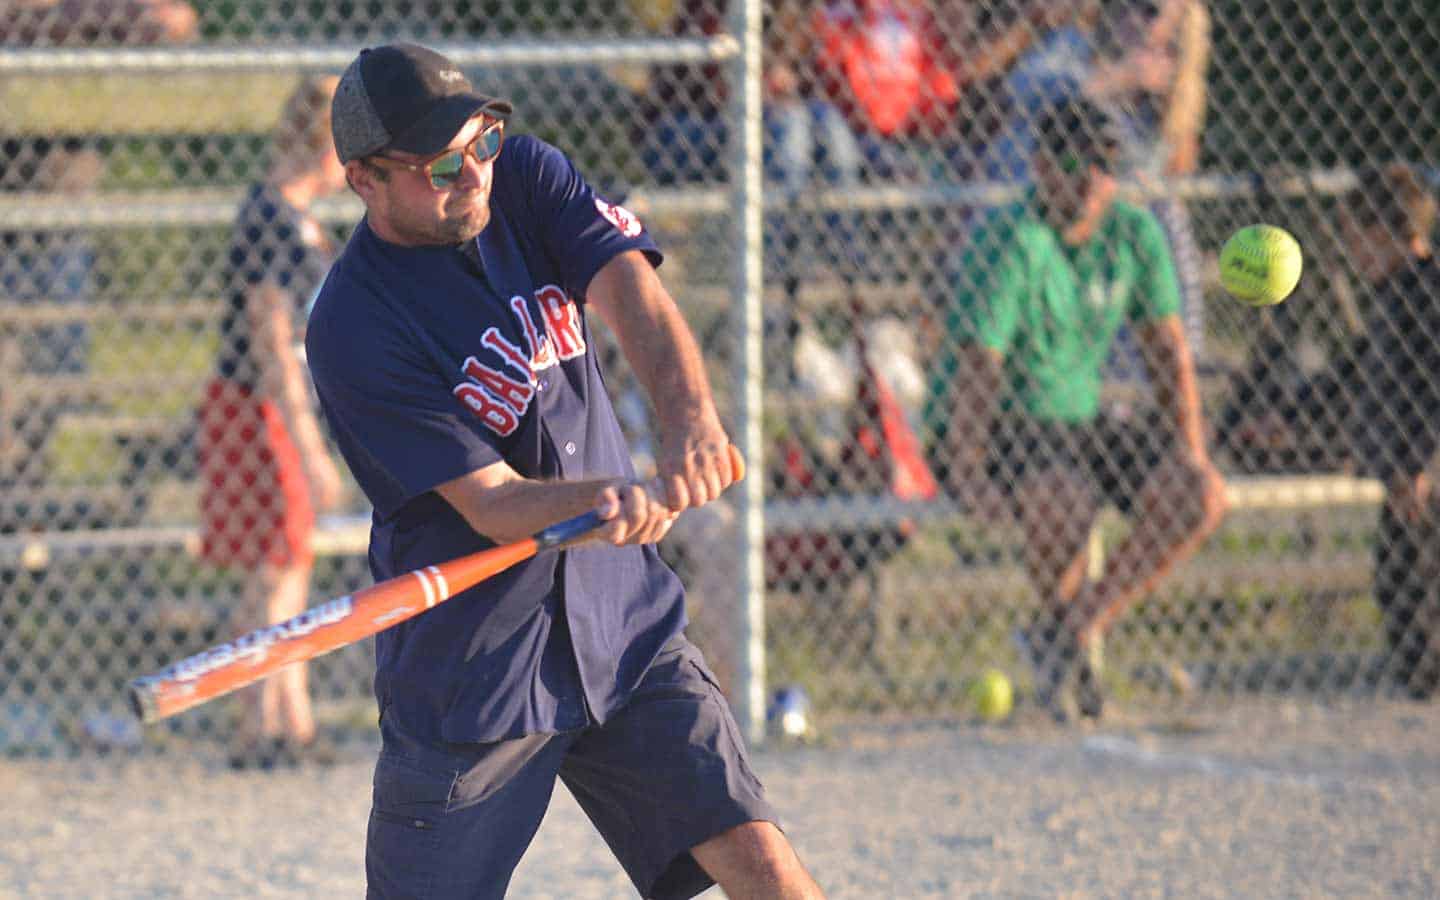 Wellesley Lions cancel this year’s Don Green  slo-pitch fundraiser due to coronavirus concerns